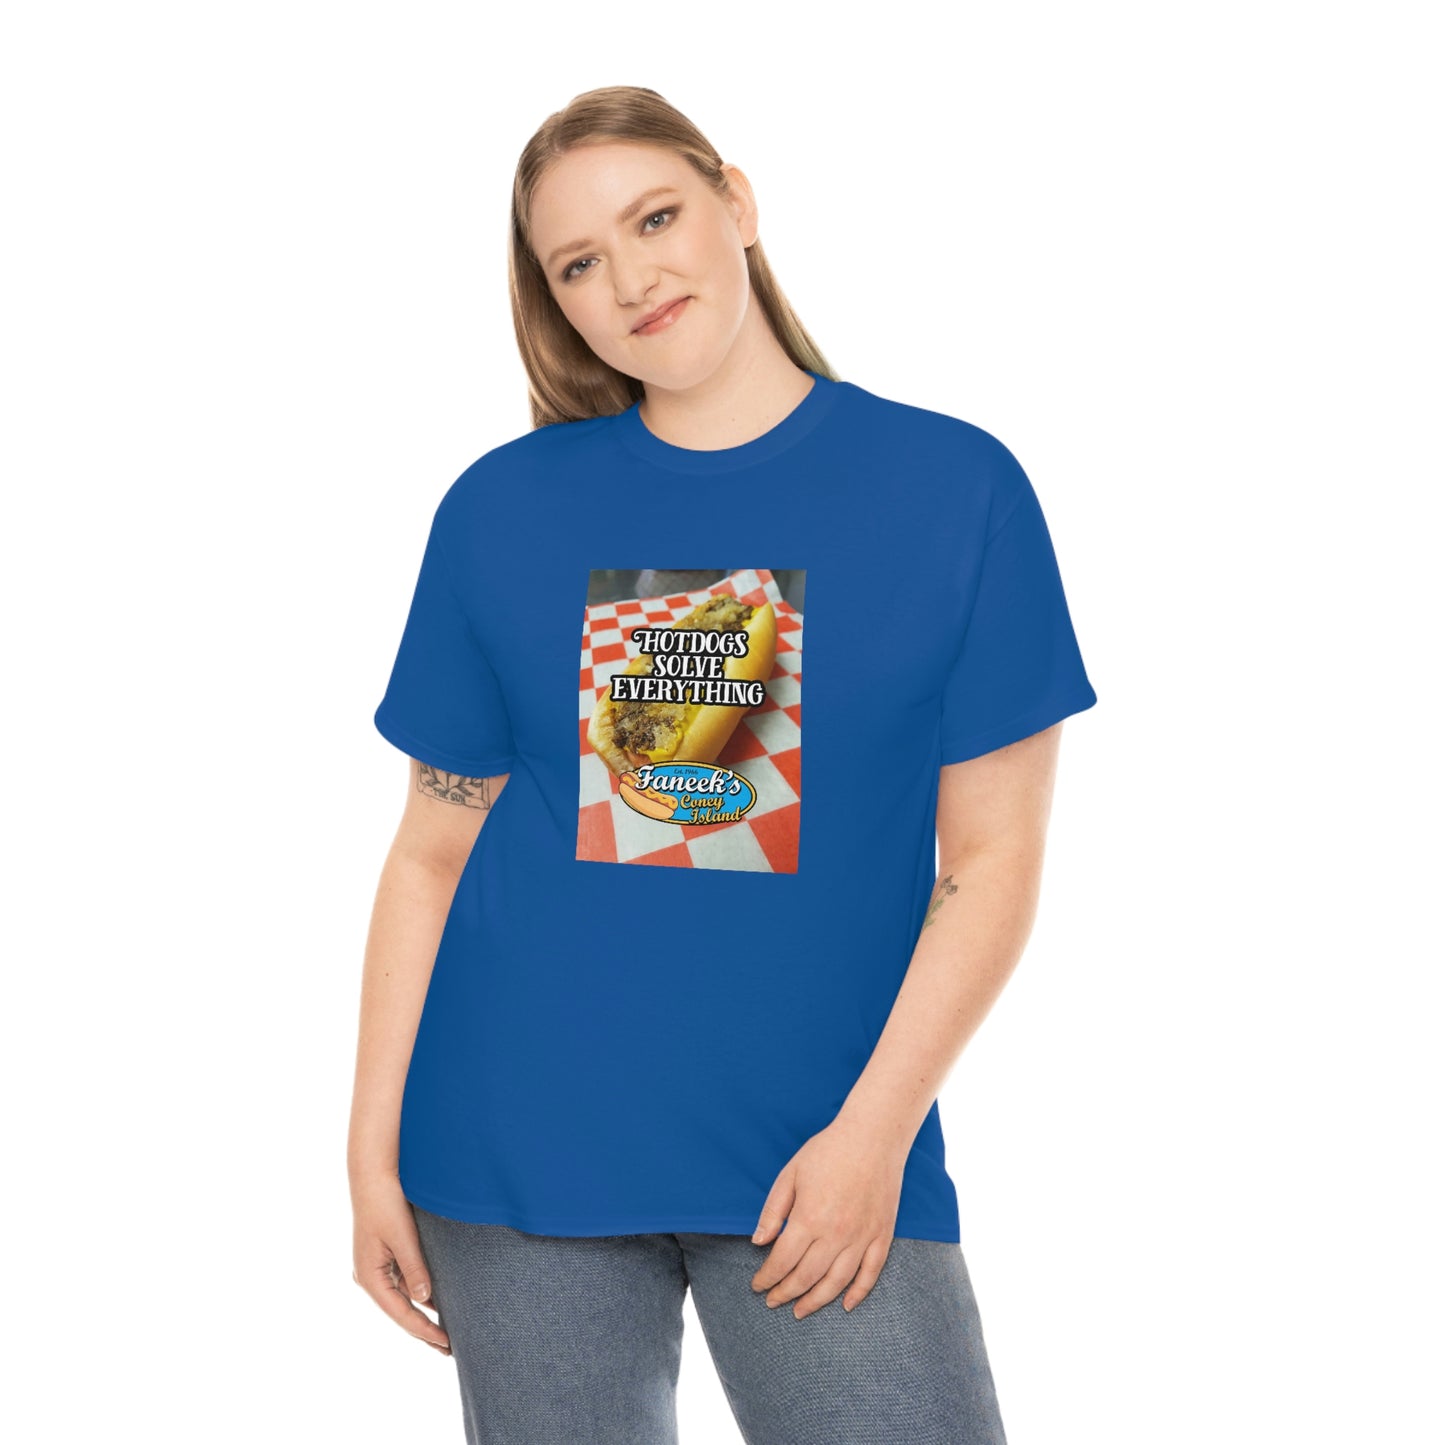 Hot dogs solve everything Tee